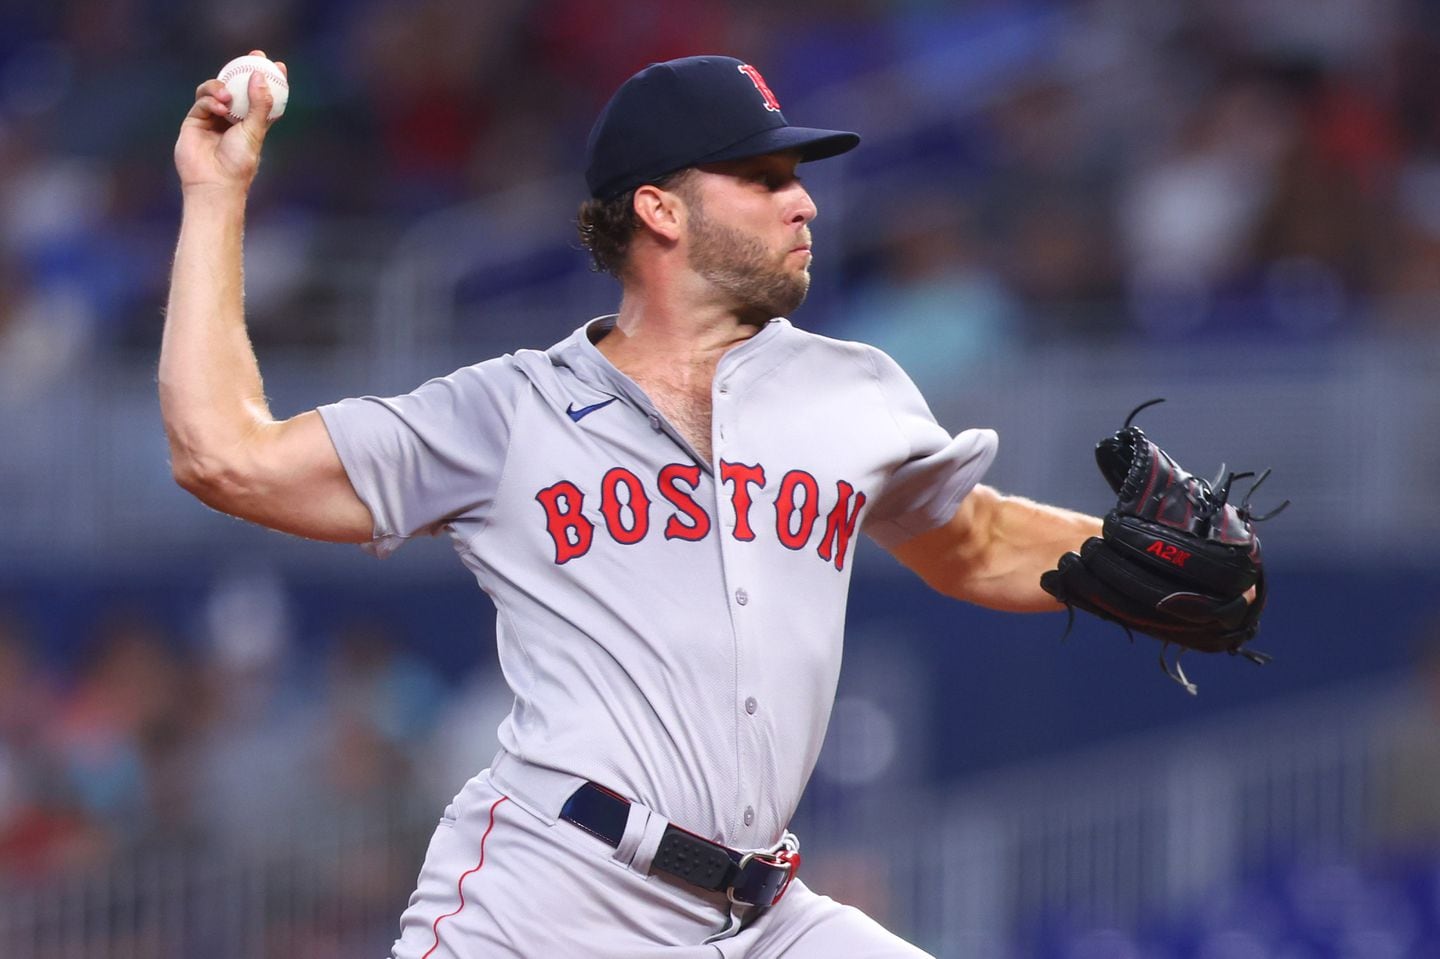 Kutter Crawford stepped up to give the Red Sox a six-innings start, with seven strikeouts and no walks while allowing one run on three hits.